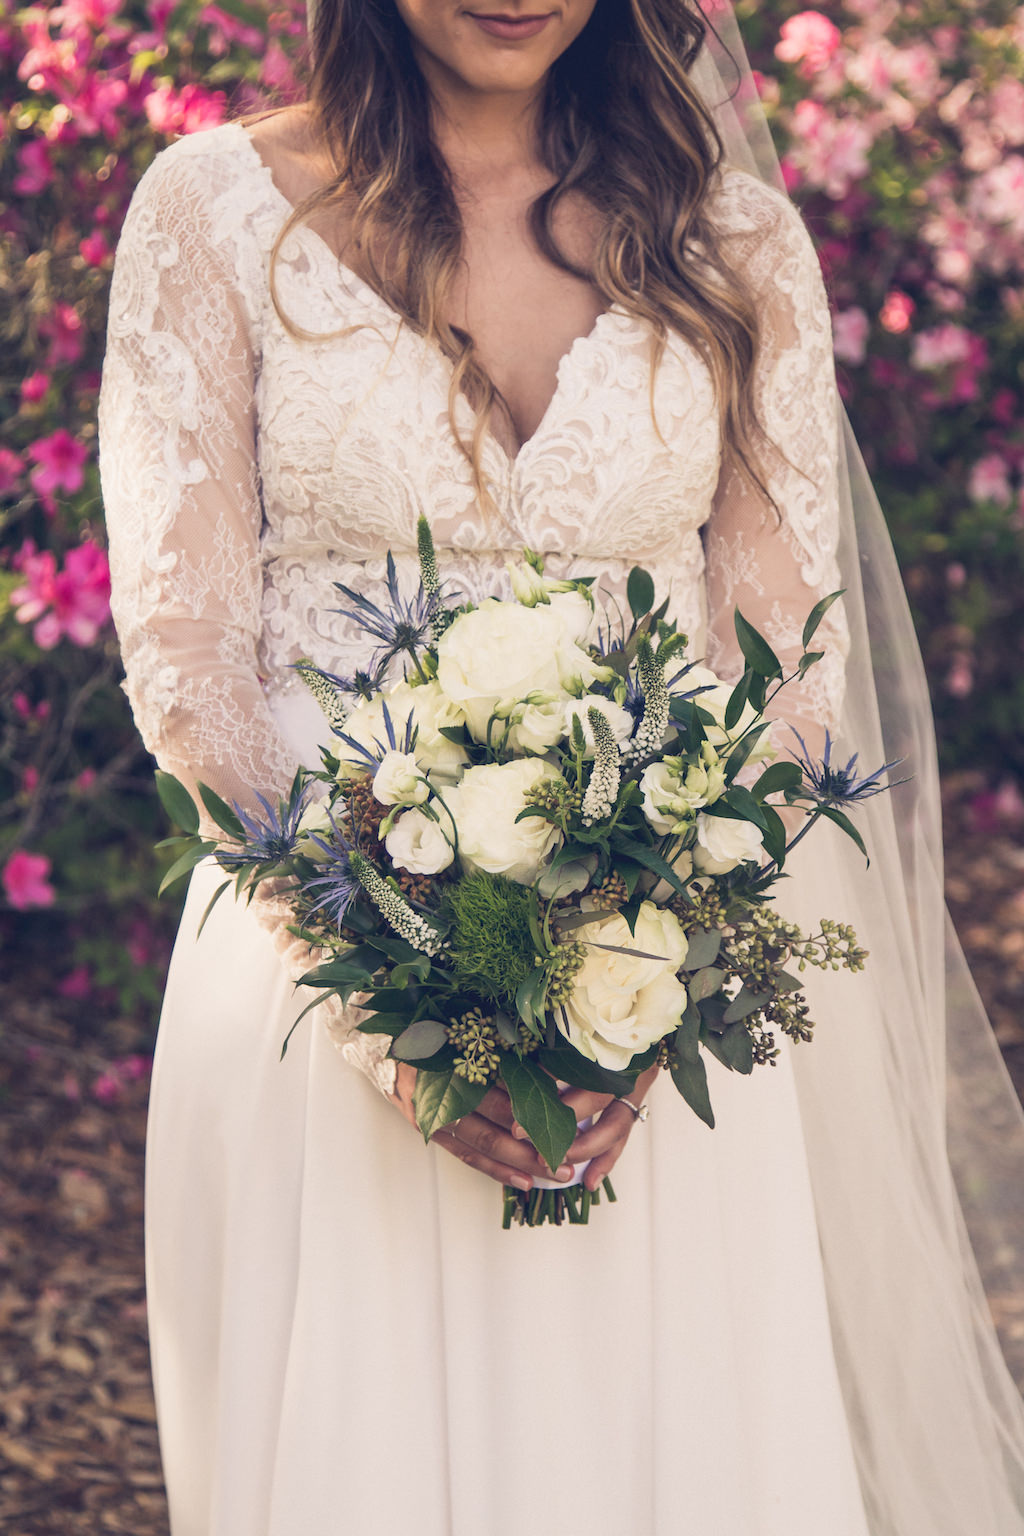 Tampa Bay Bride in Boho Inspired Flowy, Lace and Illusion V Neckline Long Sleeve Wedding Dress Holding Rustic Chic Floral Bouquet with White and Ivory Roses, Blue Thistle, Eucalyptus Leaves, Silver Sage Flowers and Gray Accents | Tampa Bay Wedding Photographer Luxe Light Images